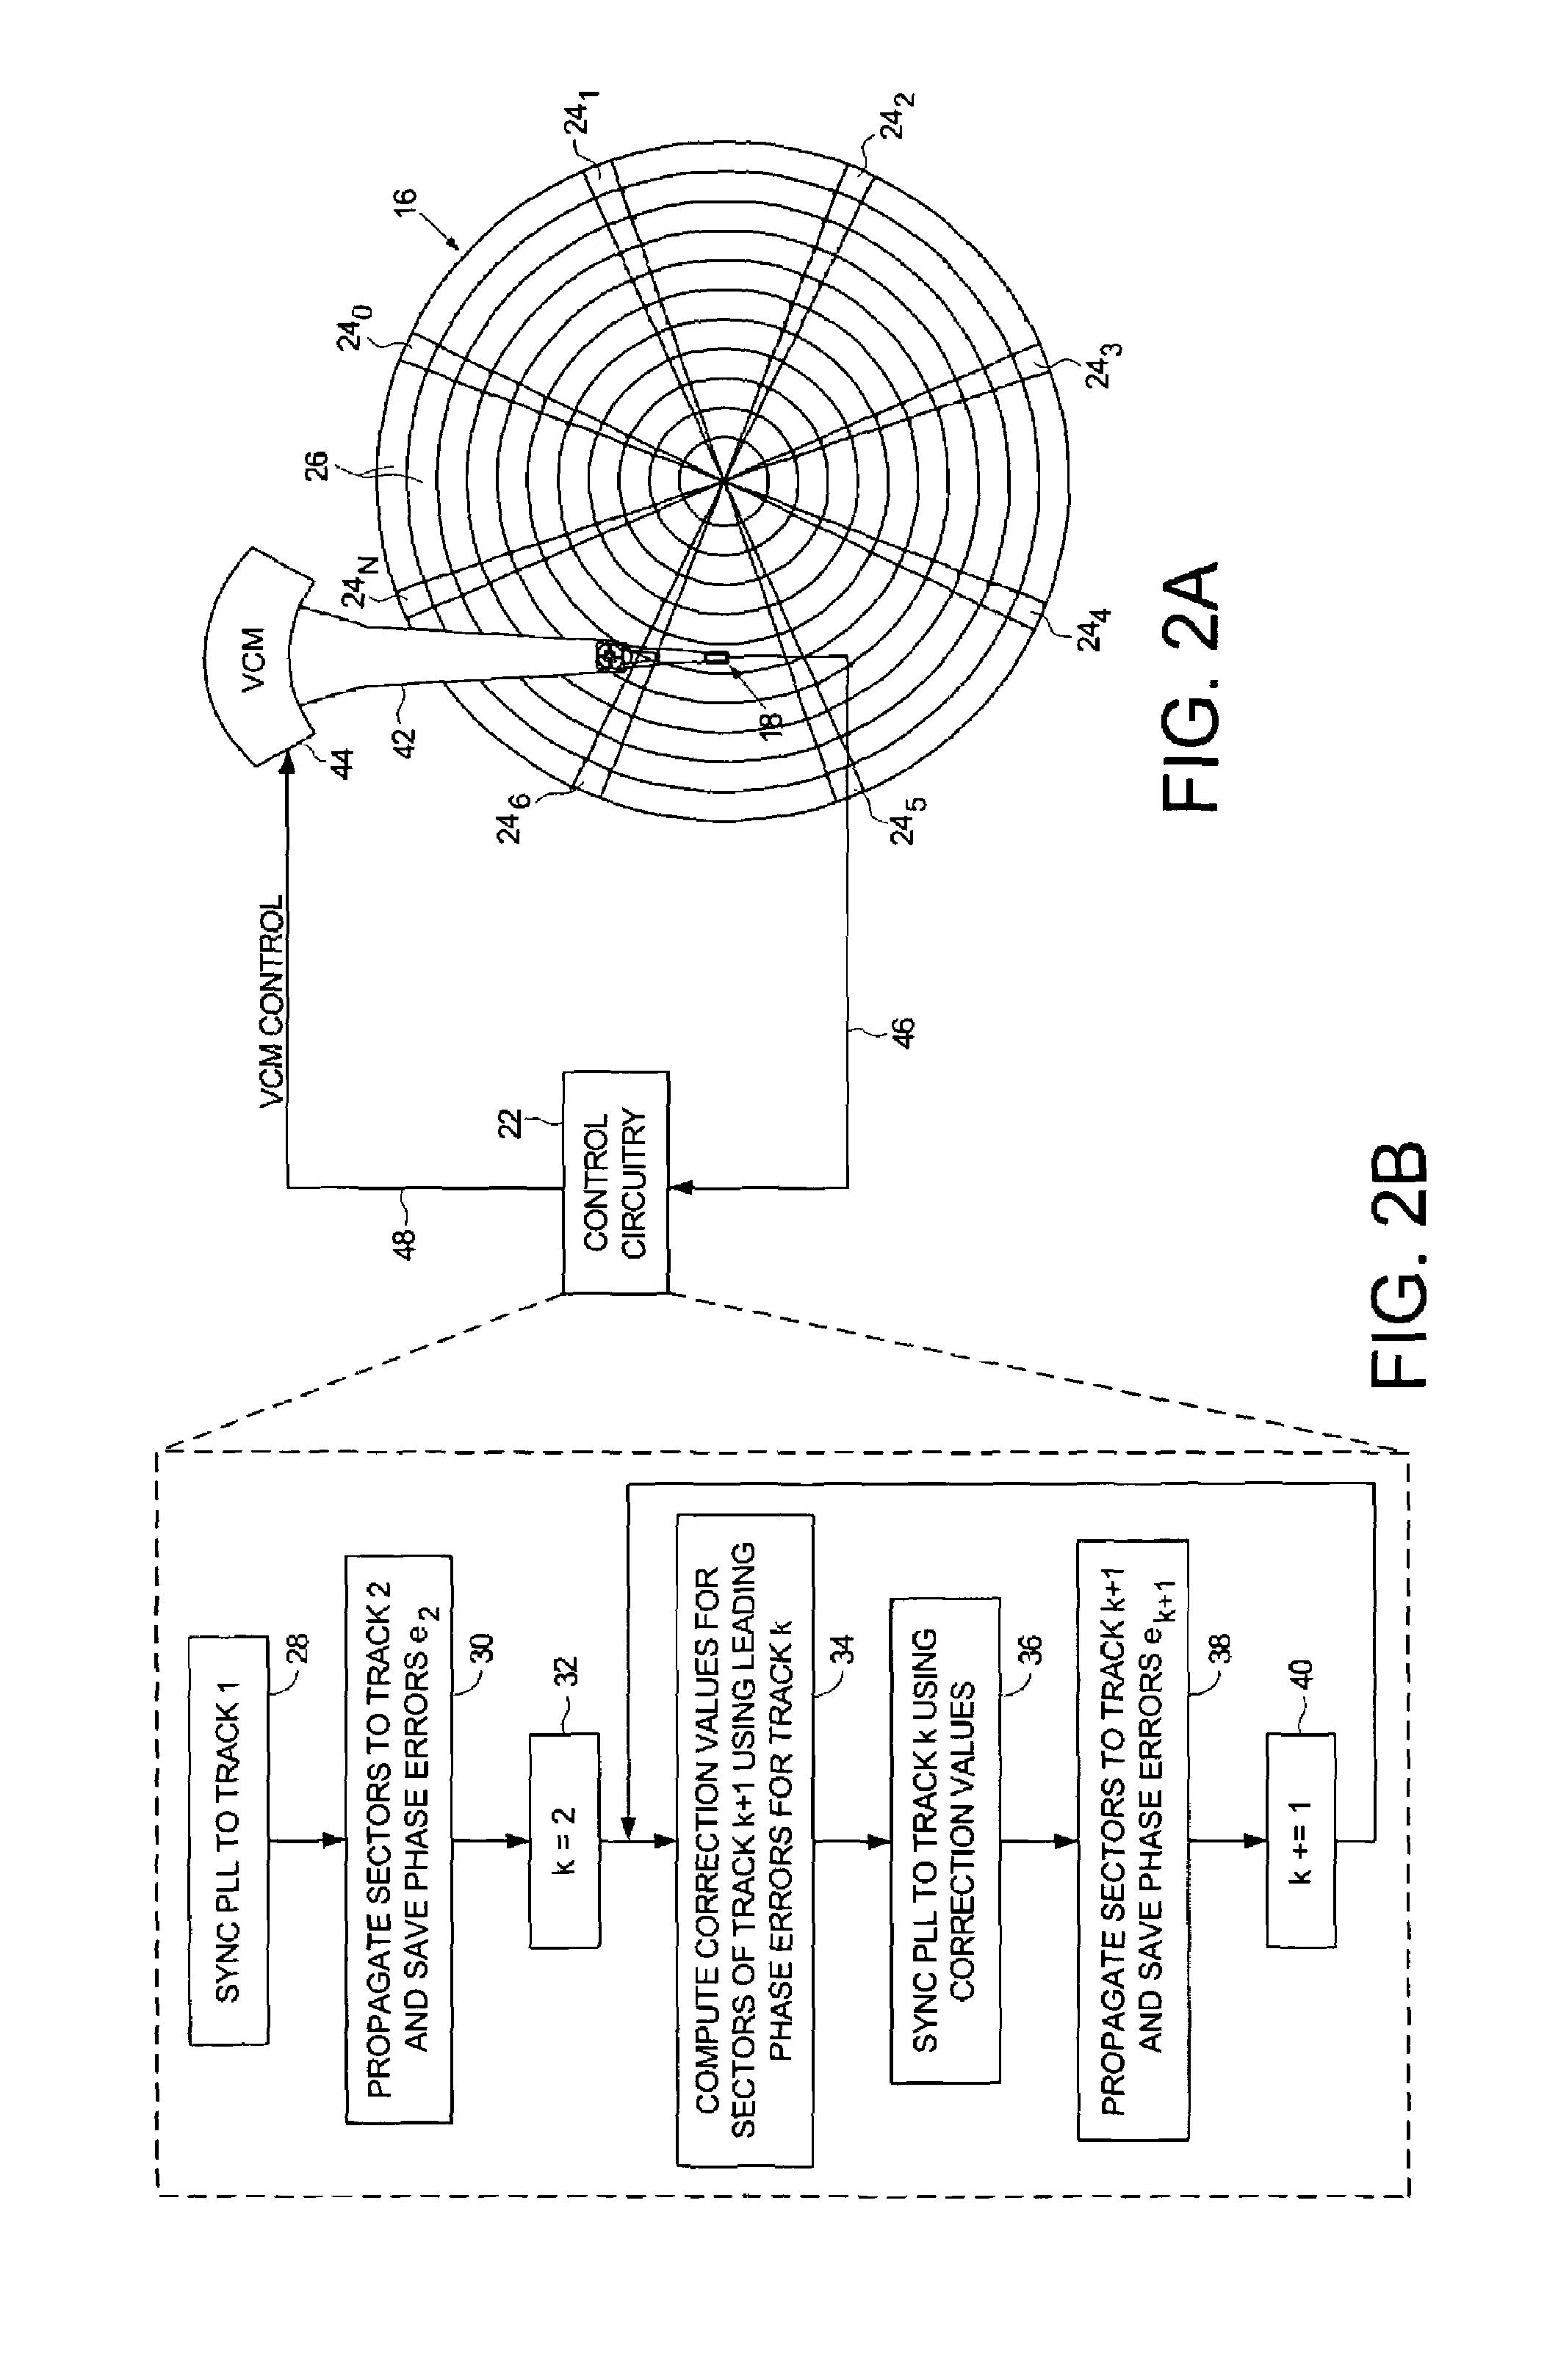 Servo writing a disk drive using correction values that attenuate phase error propagation